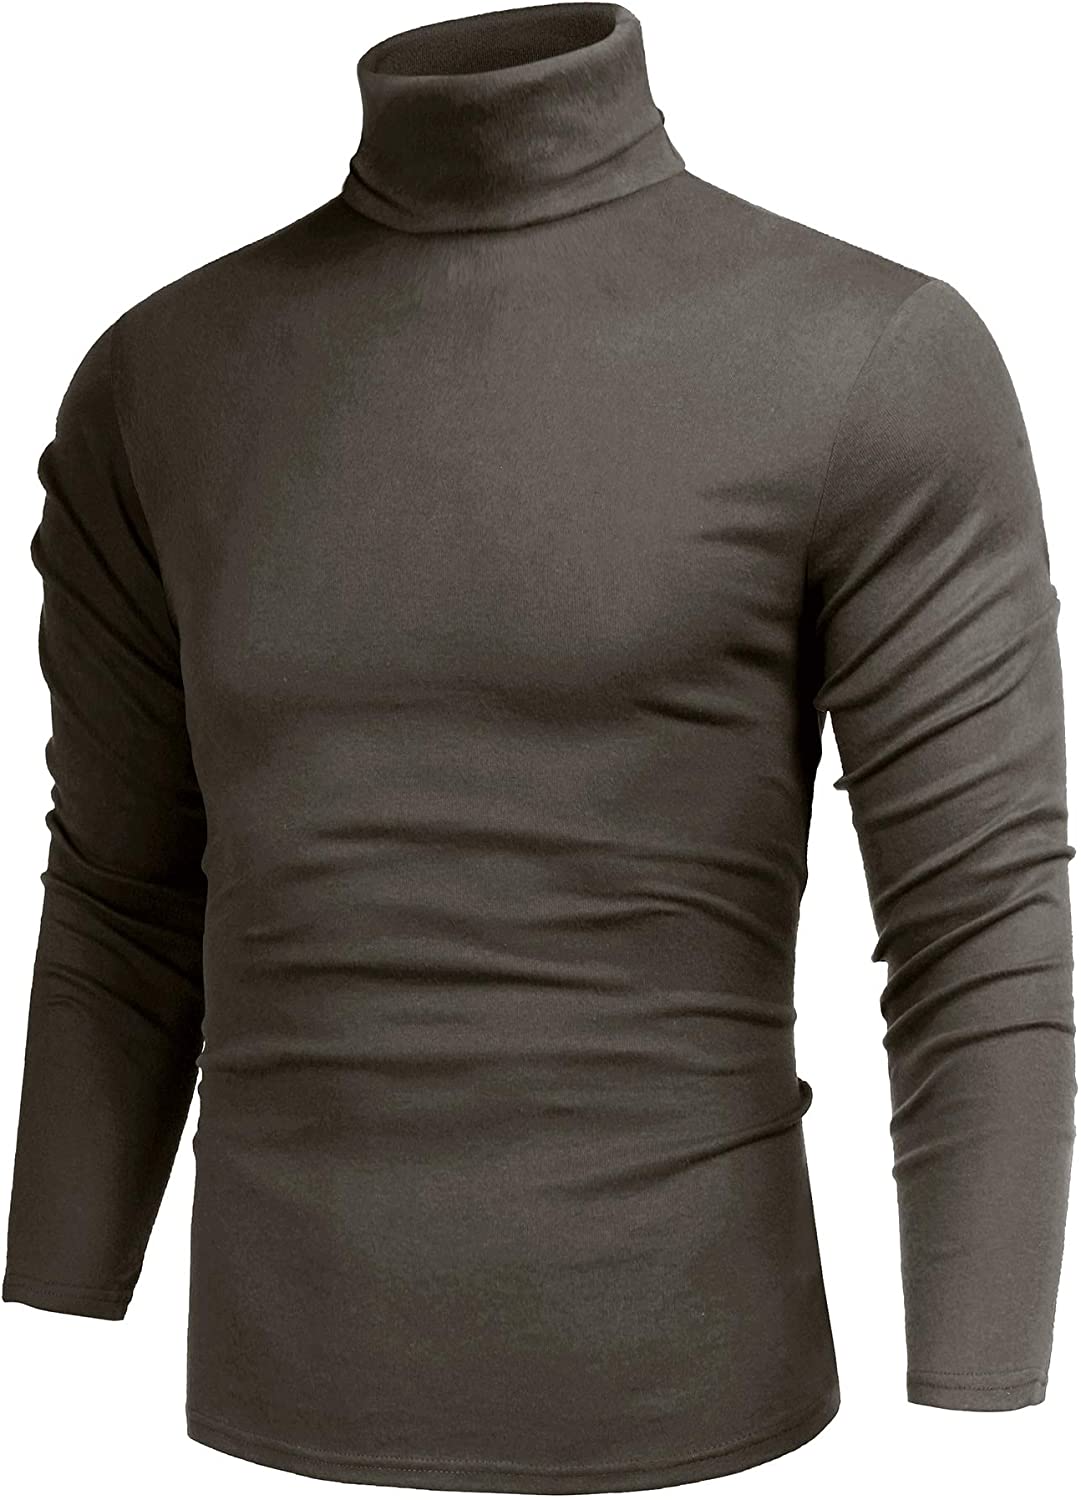 Poriff Men's Casual Slim Fit Basic Tops Knitted Thermal Turtleneck Pullover Sweater 